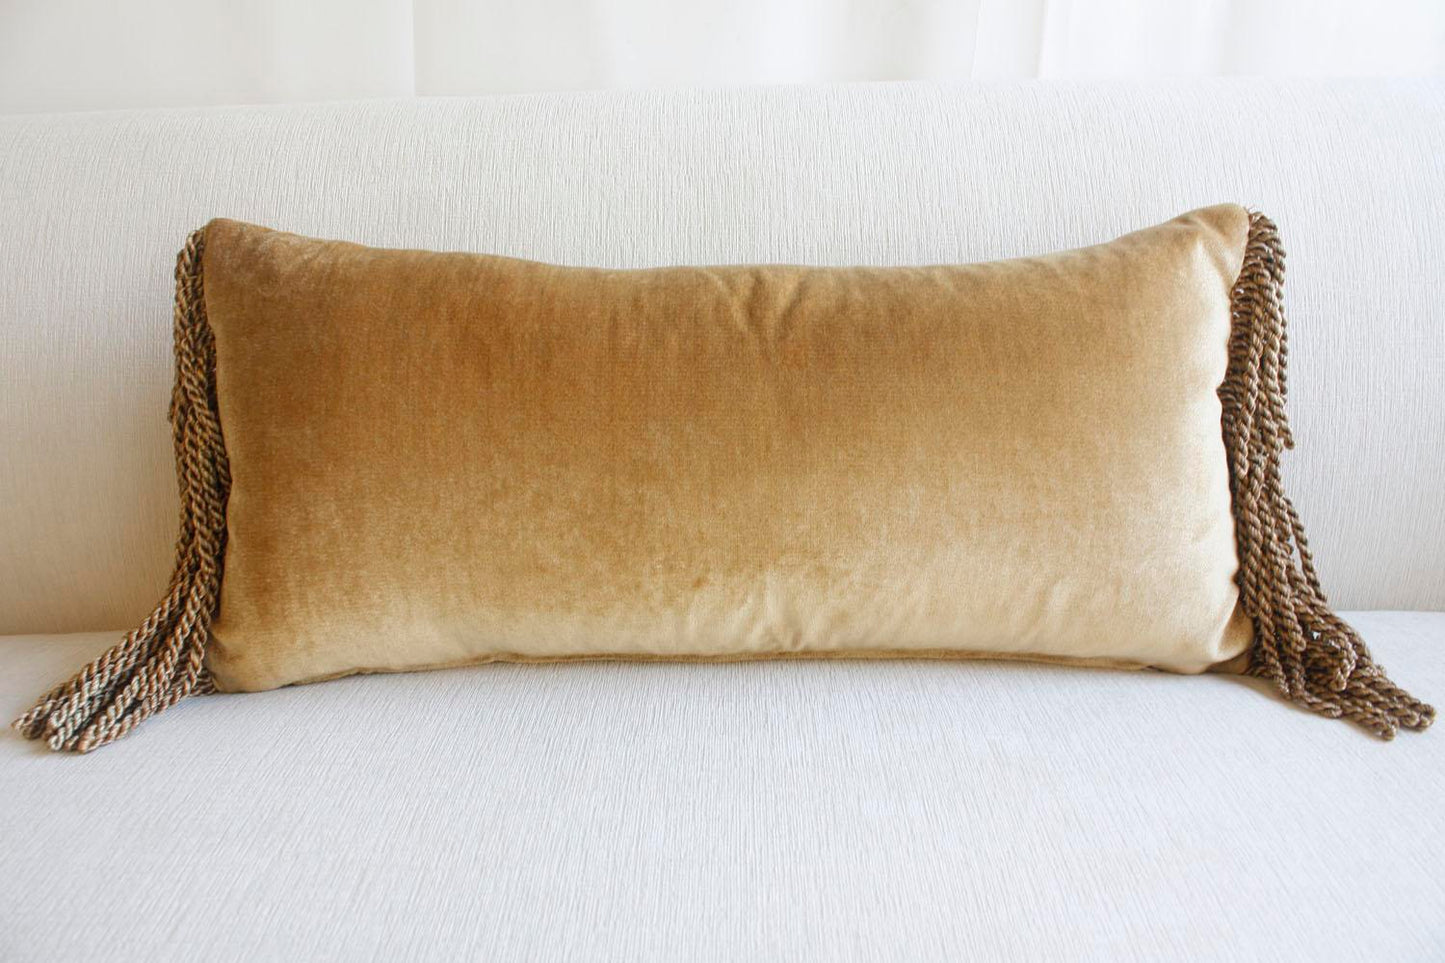 Pair of Neoclassical-style Pillows